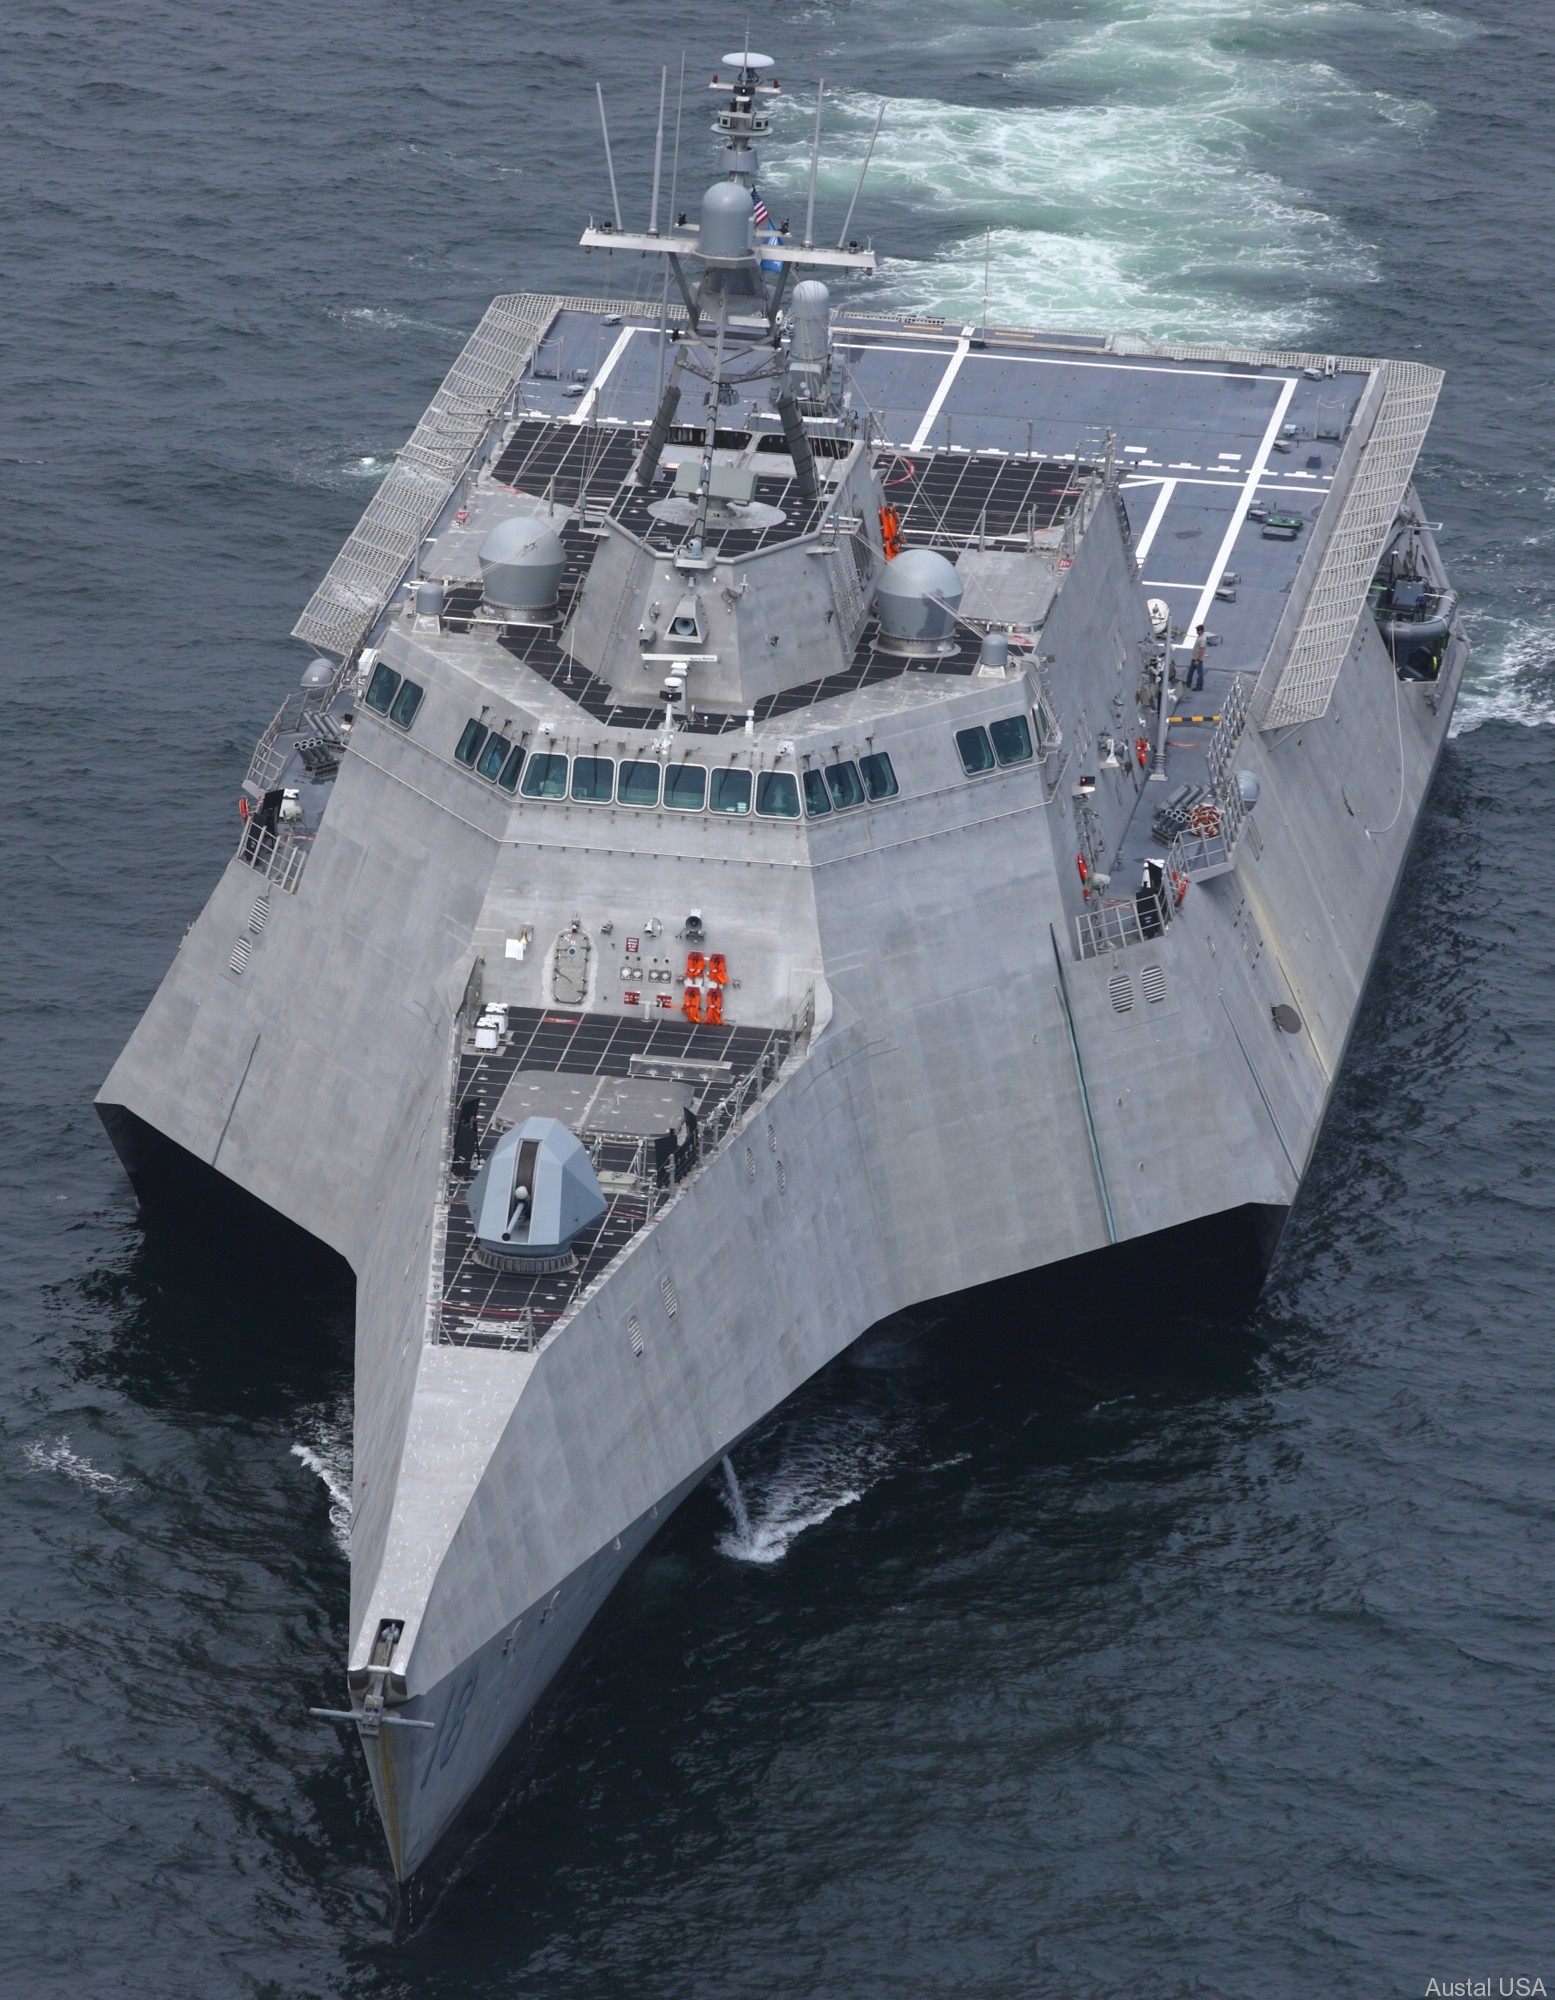 lcs-18 uss charleston independence class littoral combat ship us navy 18